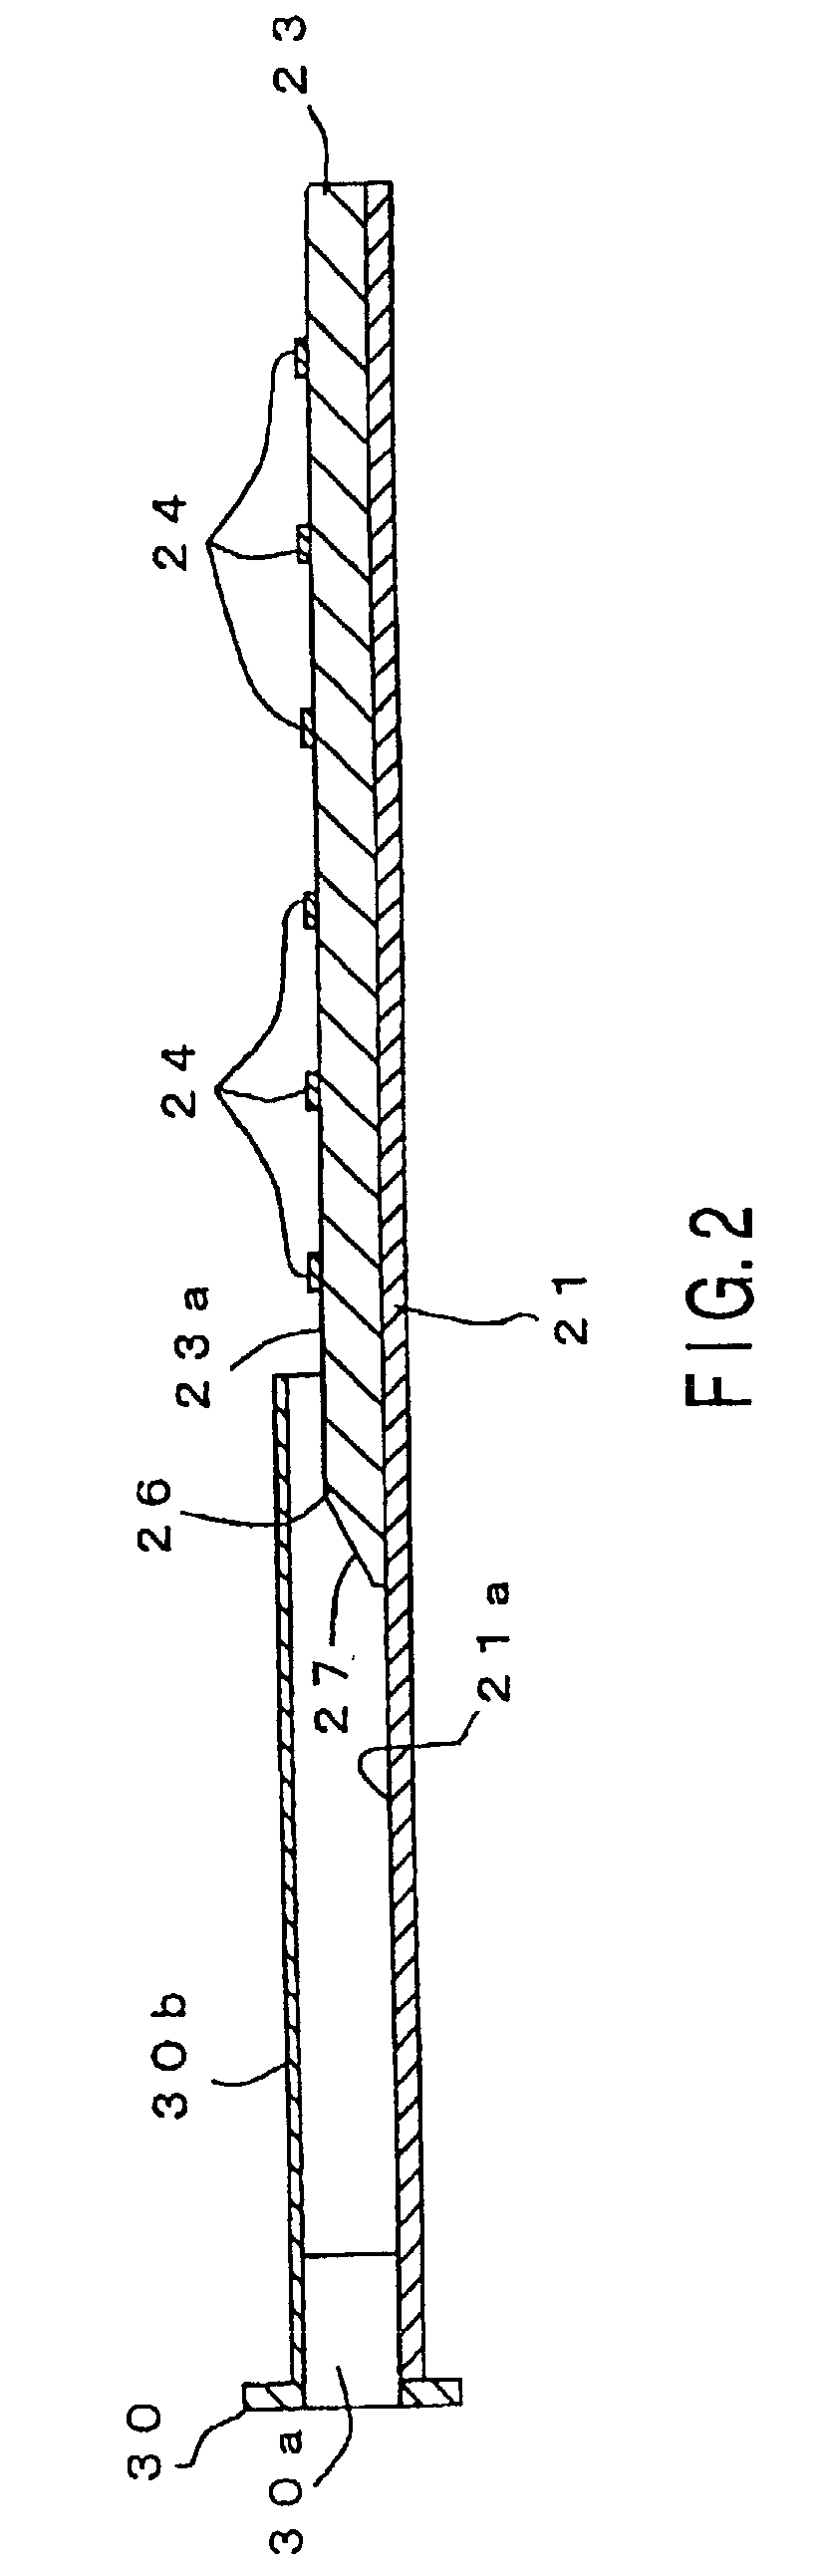 Dielectric leak wave antenna having mono-layer structure